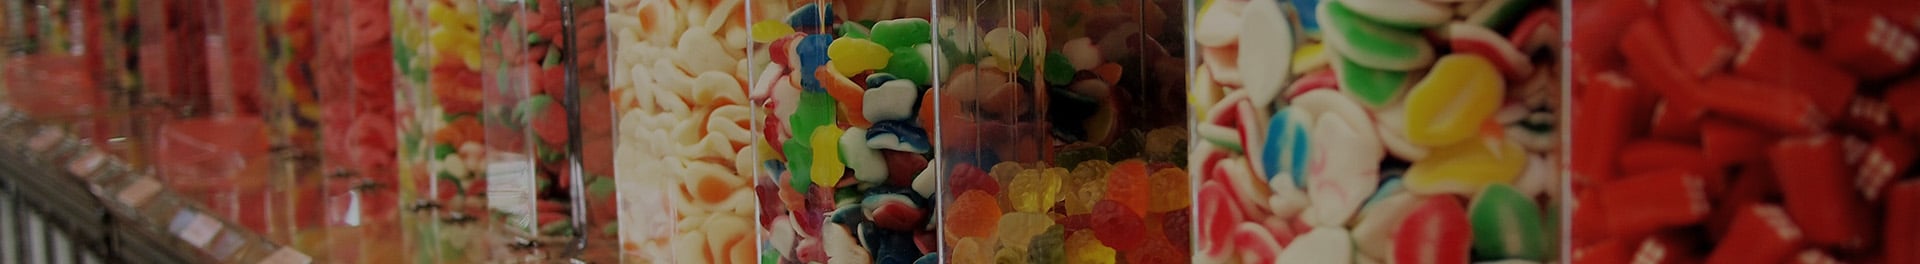 Jars filled with colorful candies.